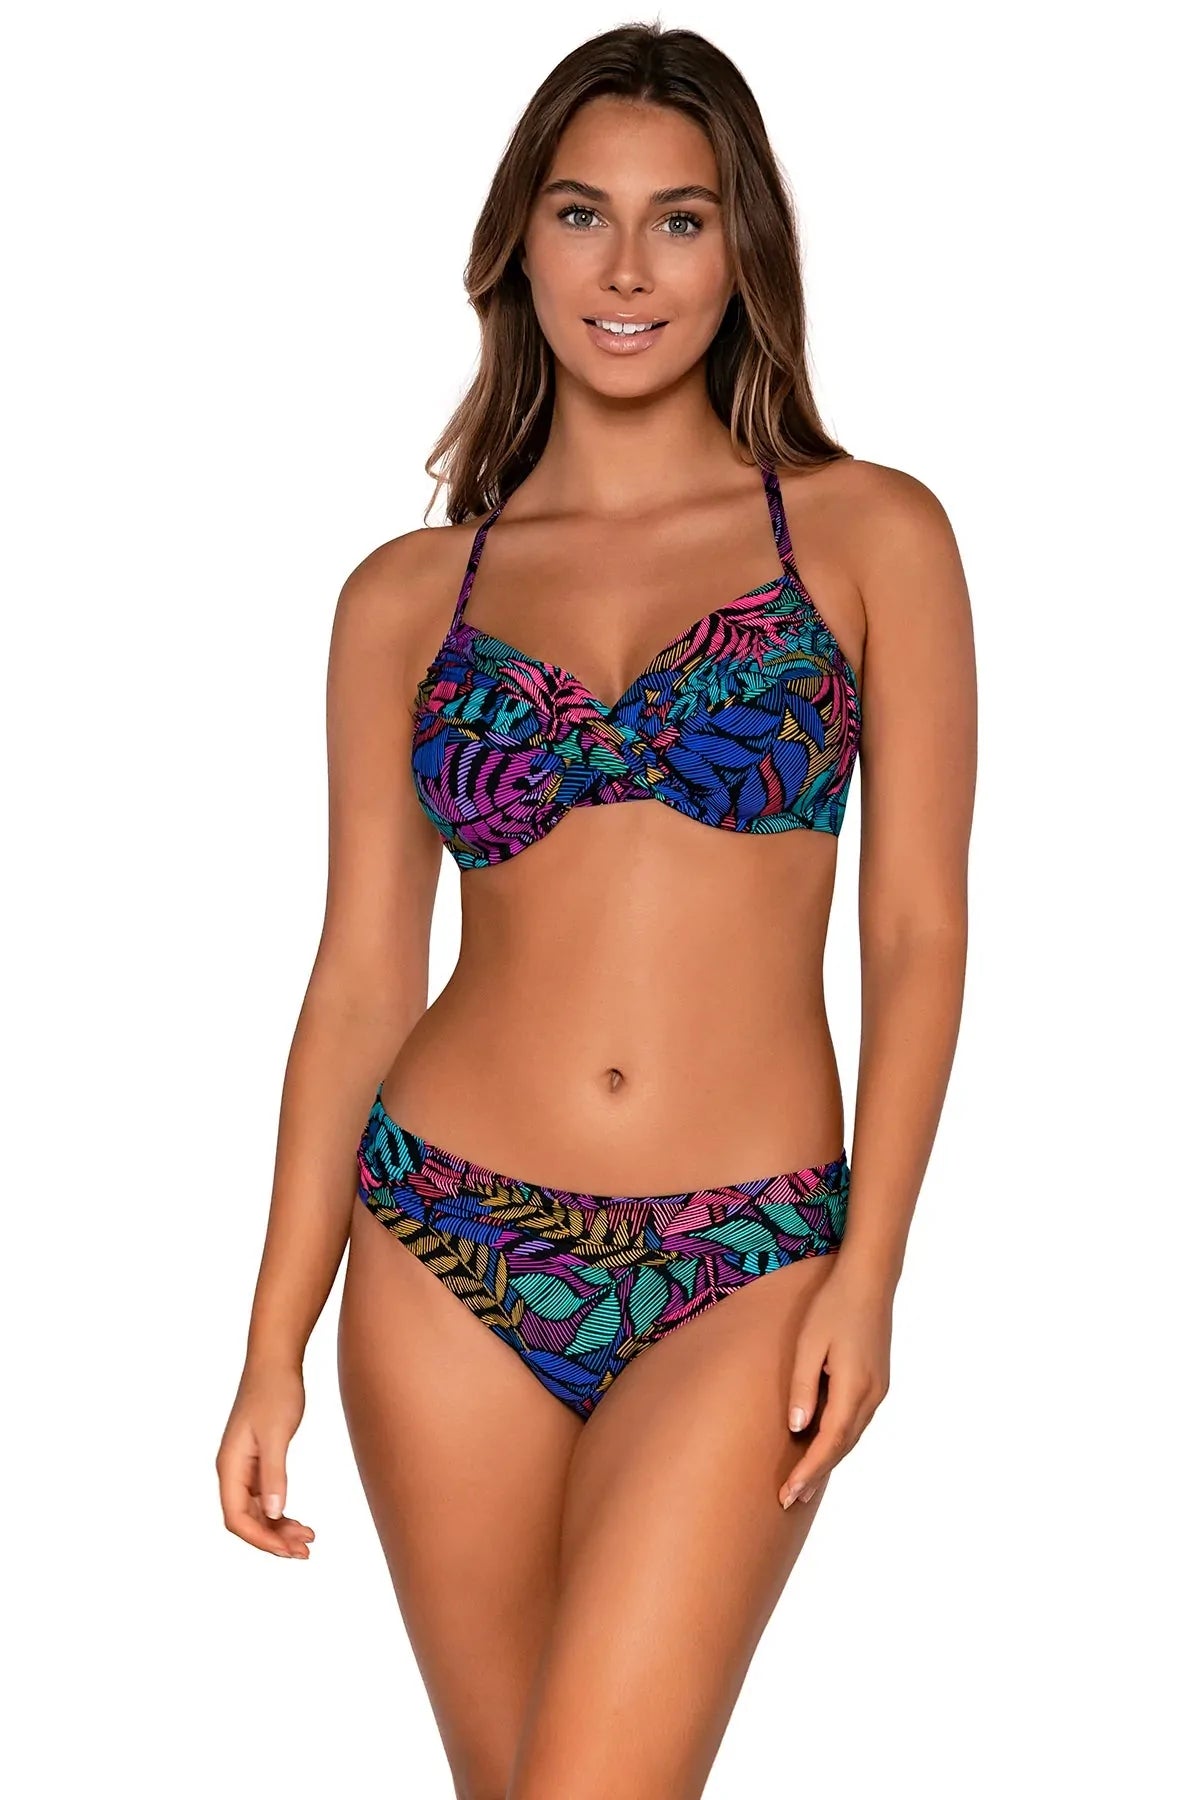 Swimsuits For All Women's Plus Size Bra-Sized Cross-Front Tankini Top 46 Dd  Black Paradise Floral